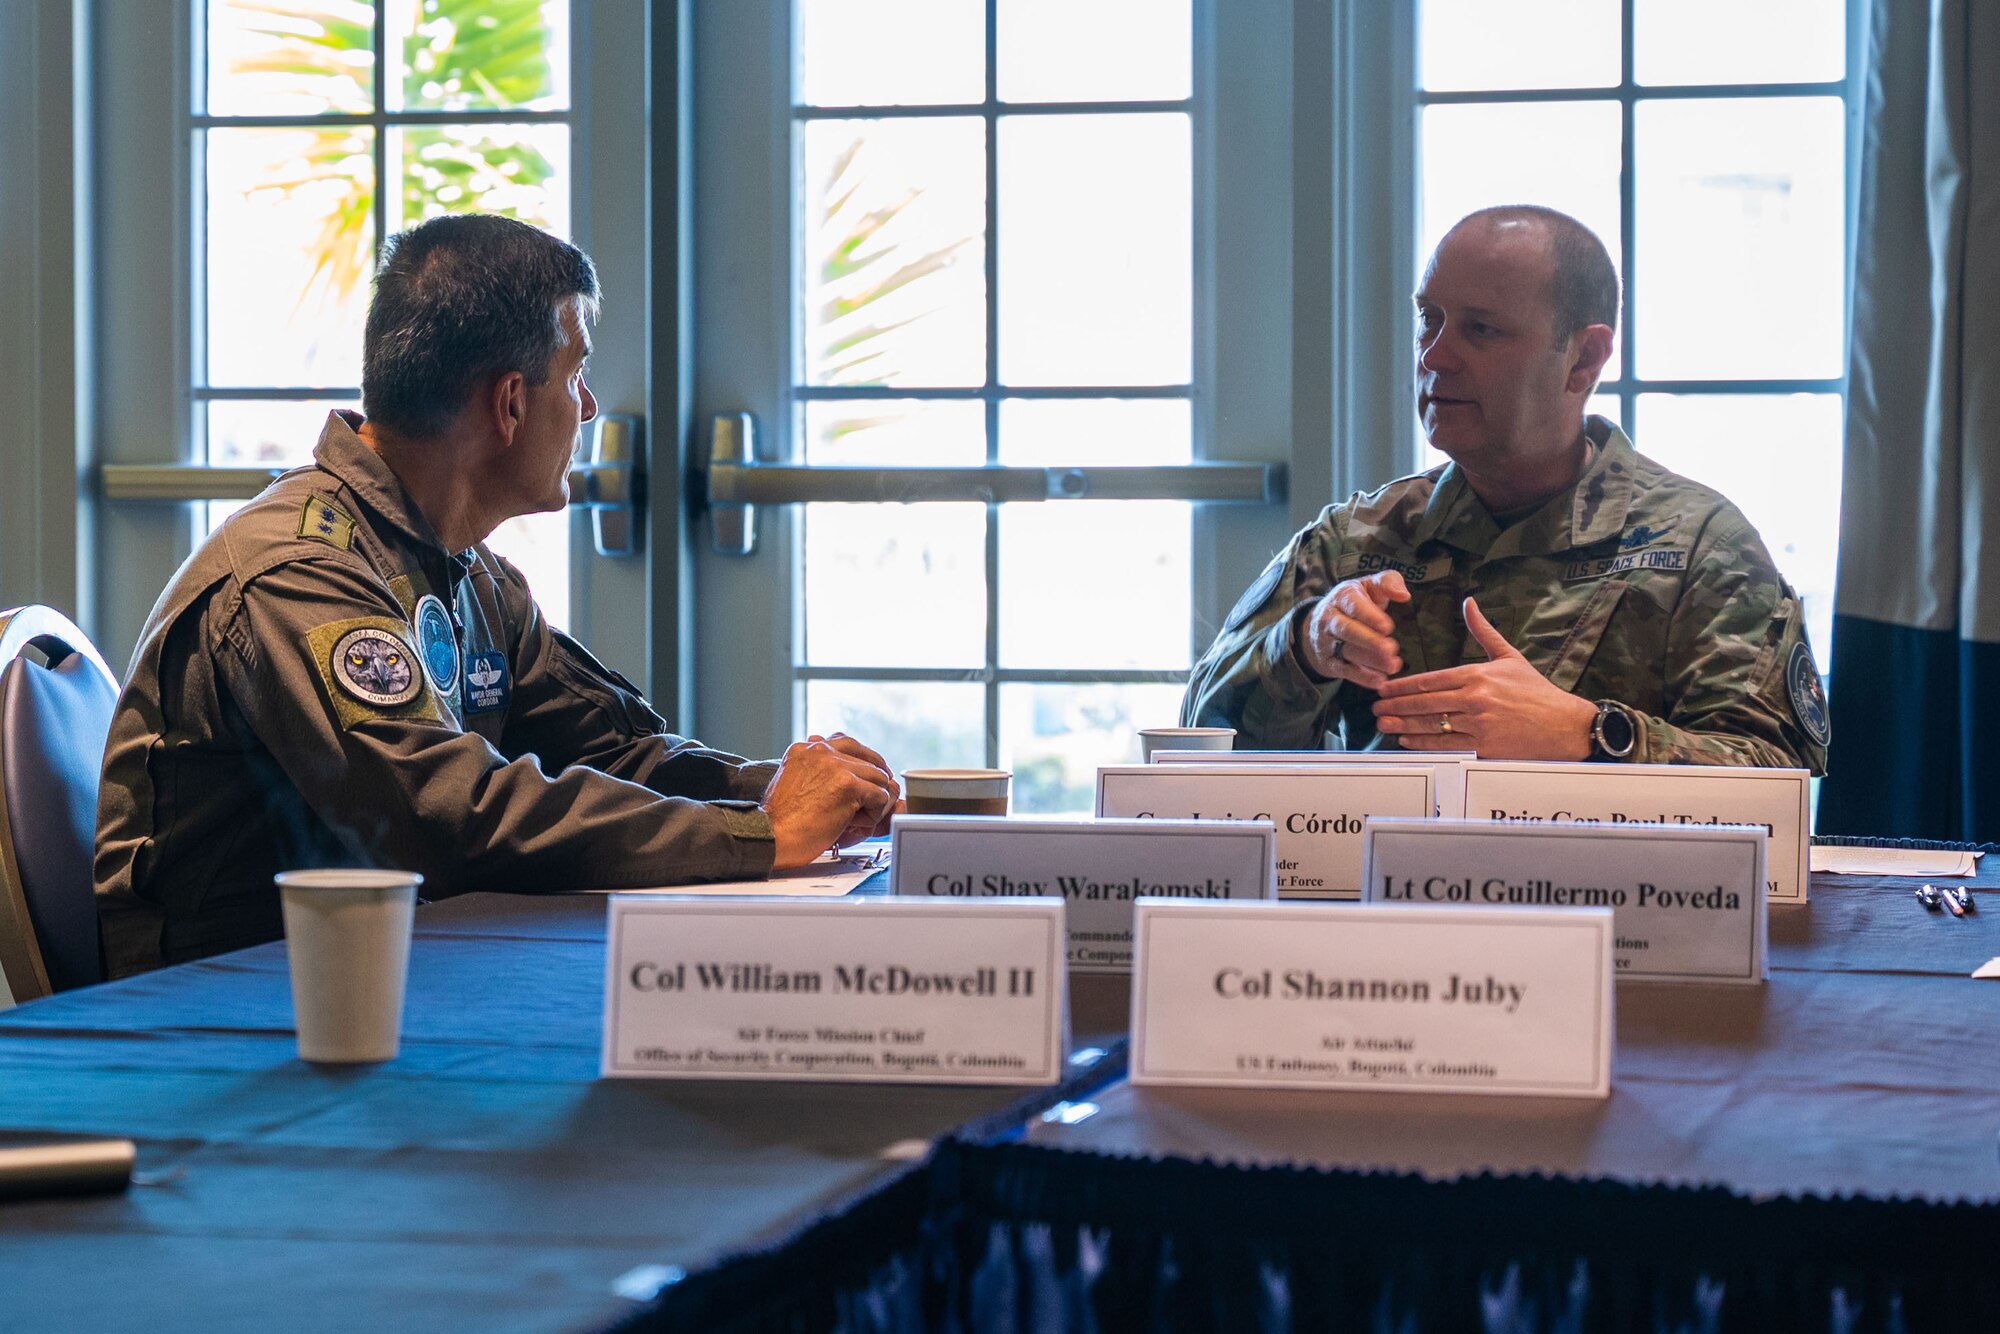 Gen. Luis Carlos Córdoba Avendaño, Colombian Air Force (COLAF) commander, left, talks with U.S. Space Force Maj. Gen. Douglas A. Schiess, Combined Force Space Component Command commander, during an office call at Vandenberg Space Force Base, Calif., April 10, 2023. Córdoba led a delegation of industry and academia representatives to witness the launch of COLAF's second nanosatellite in partnership with EXOLAUNCH and SpaceX. The visit also included an in-depth pad tour of SpaceX's Space Launch Complex-4 and a sit-down meeting with Schiess to discuss on-going space cooperation efforts. (U.S. Space Force photo by Tech. Sgt. Luke Kitterman)